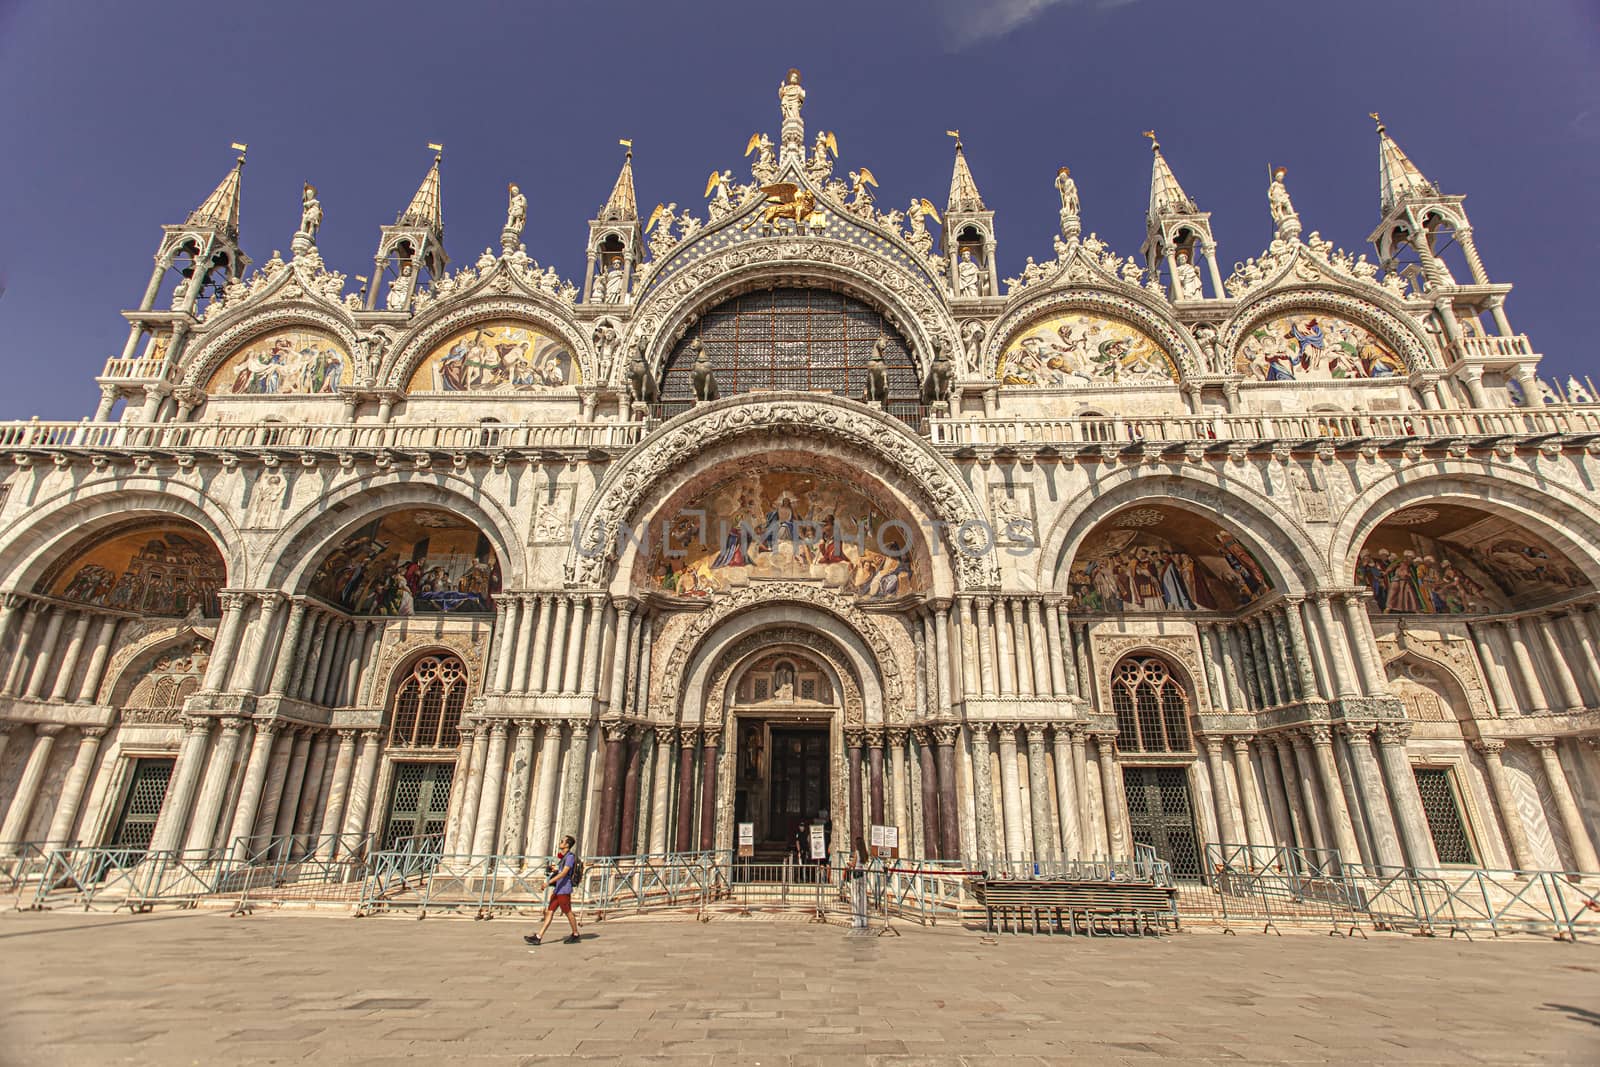 San Marco Cathedral in Venice, Italy 2 by pippocarlot